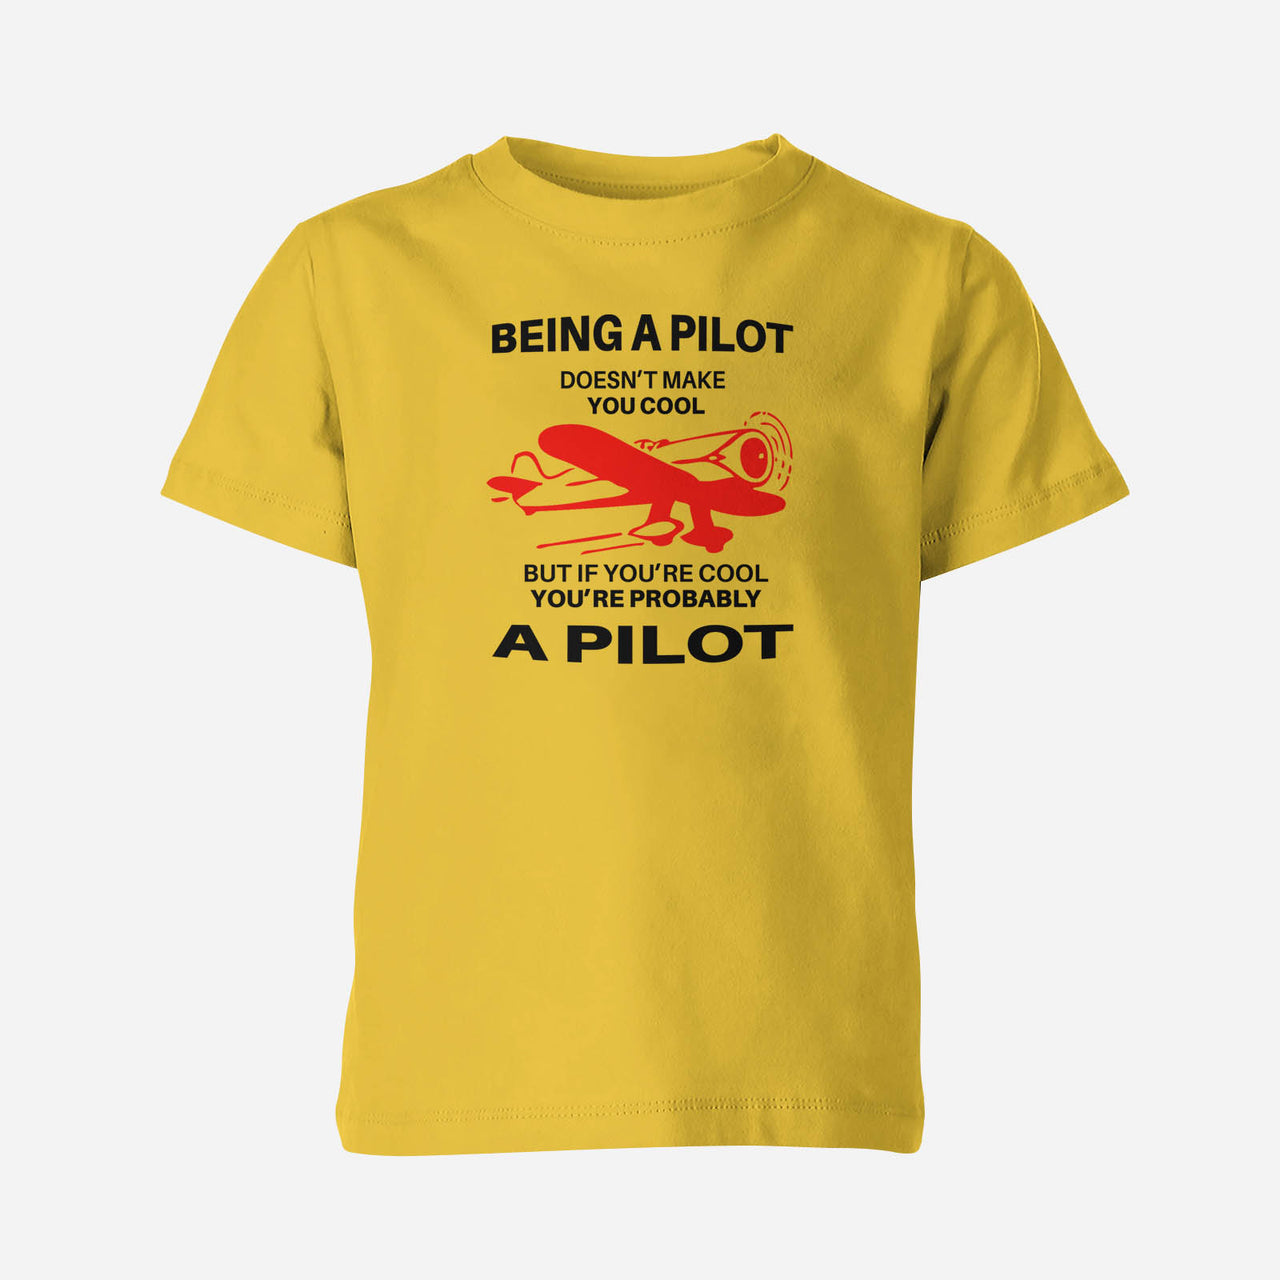 If You're Cool You're Probably a Pilot Designed Children T-Shirts